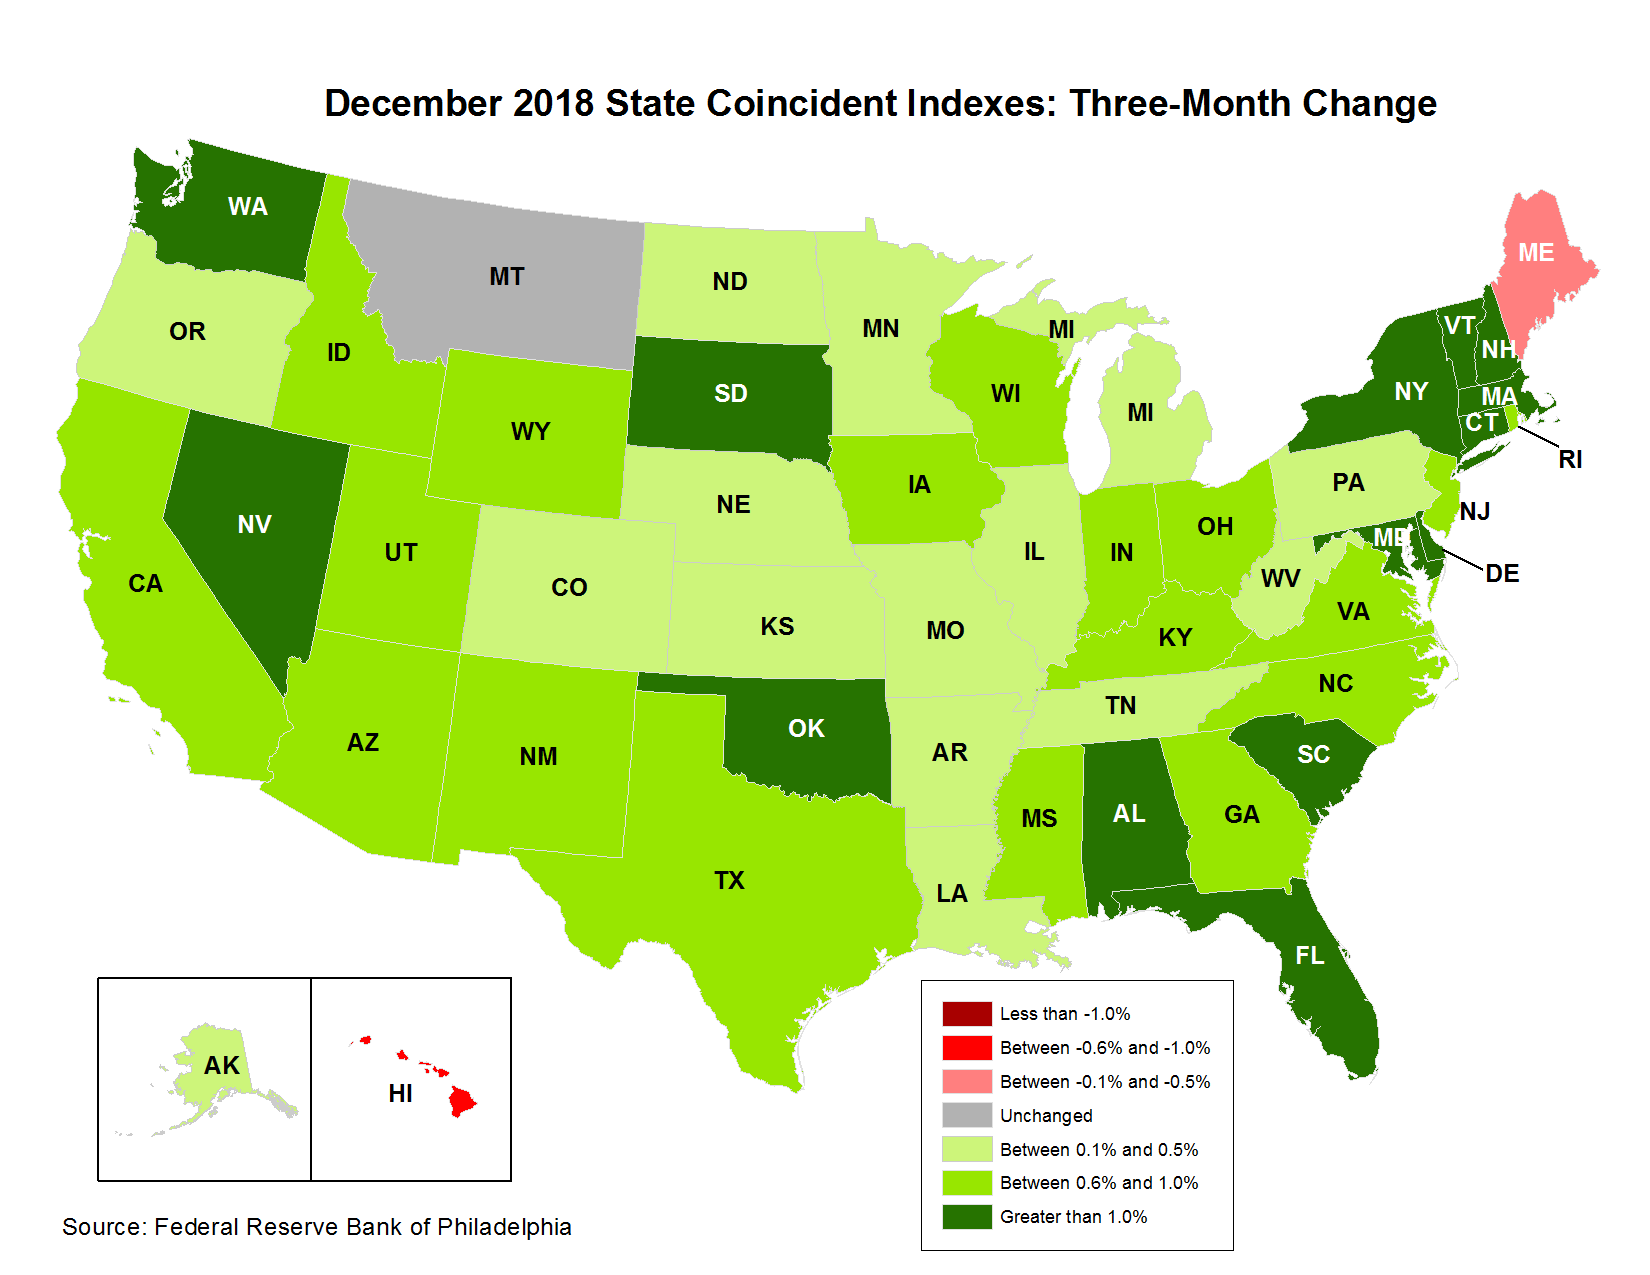 Map of the U.S. showing the State Coincident Indexes Three-Month Change in December 2018